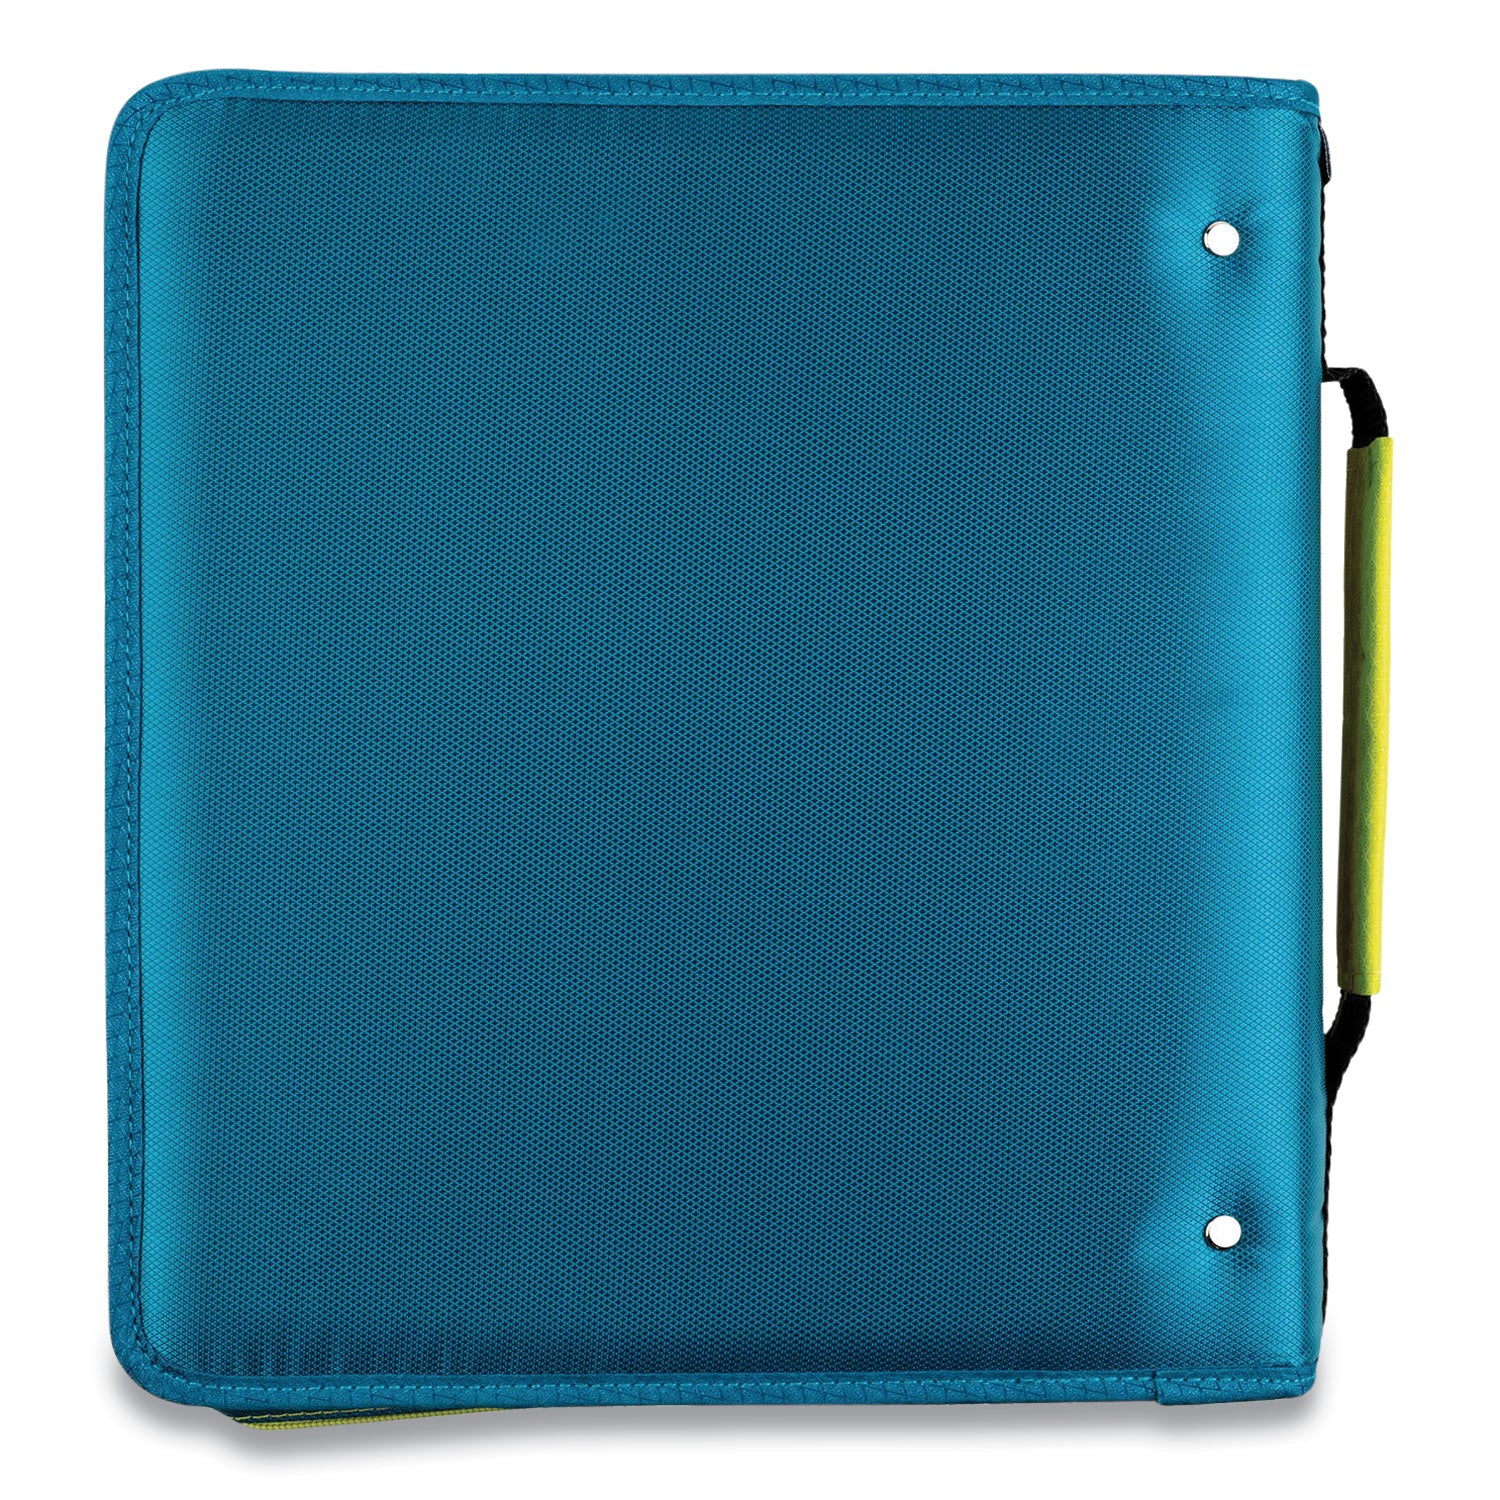 zipper-binder-3-rings-2-capacity-11-x-85-teal-yellow-accents_acc29052ih8 - 2